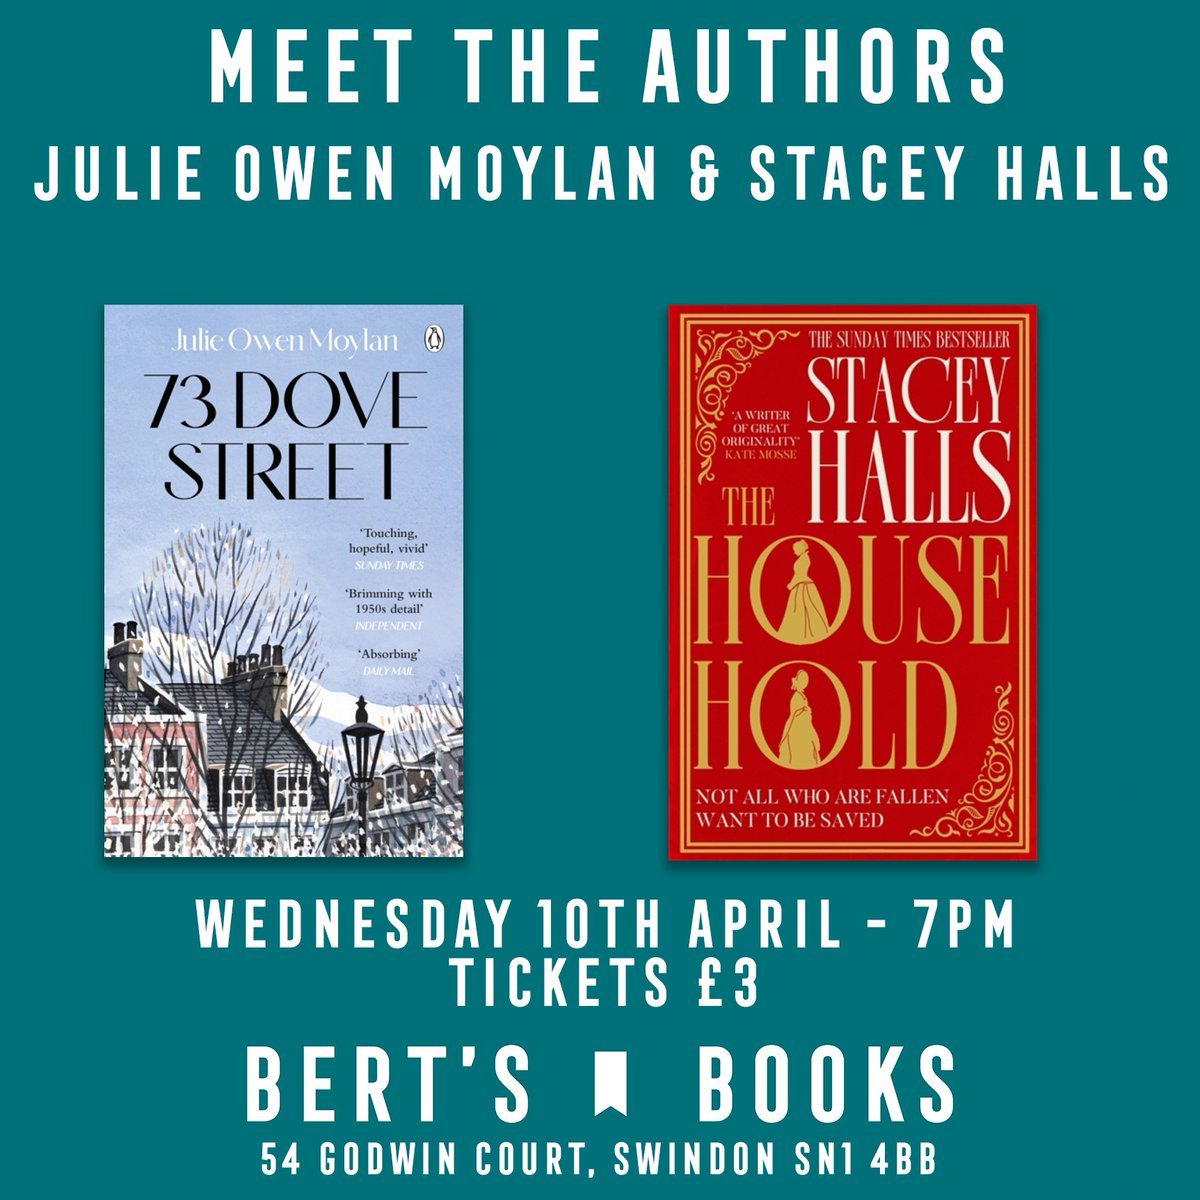 Come on down to @bertsbooks on Wednesday 10th April to meet historical fiction favourites @JulieOwenMoylan and @stacey_halls. Tickets available here: bertsbooks.co.uk/product/10th-a… #73DoveStreet